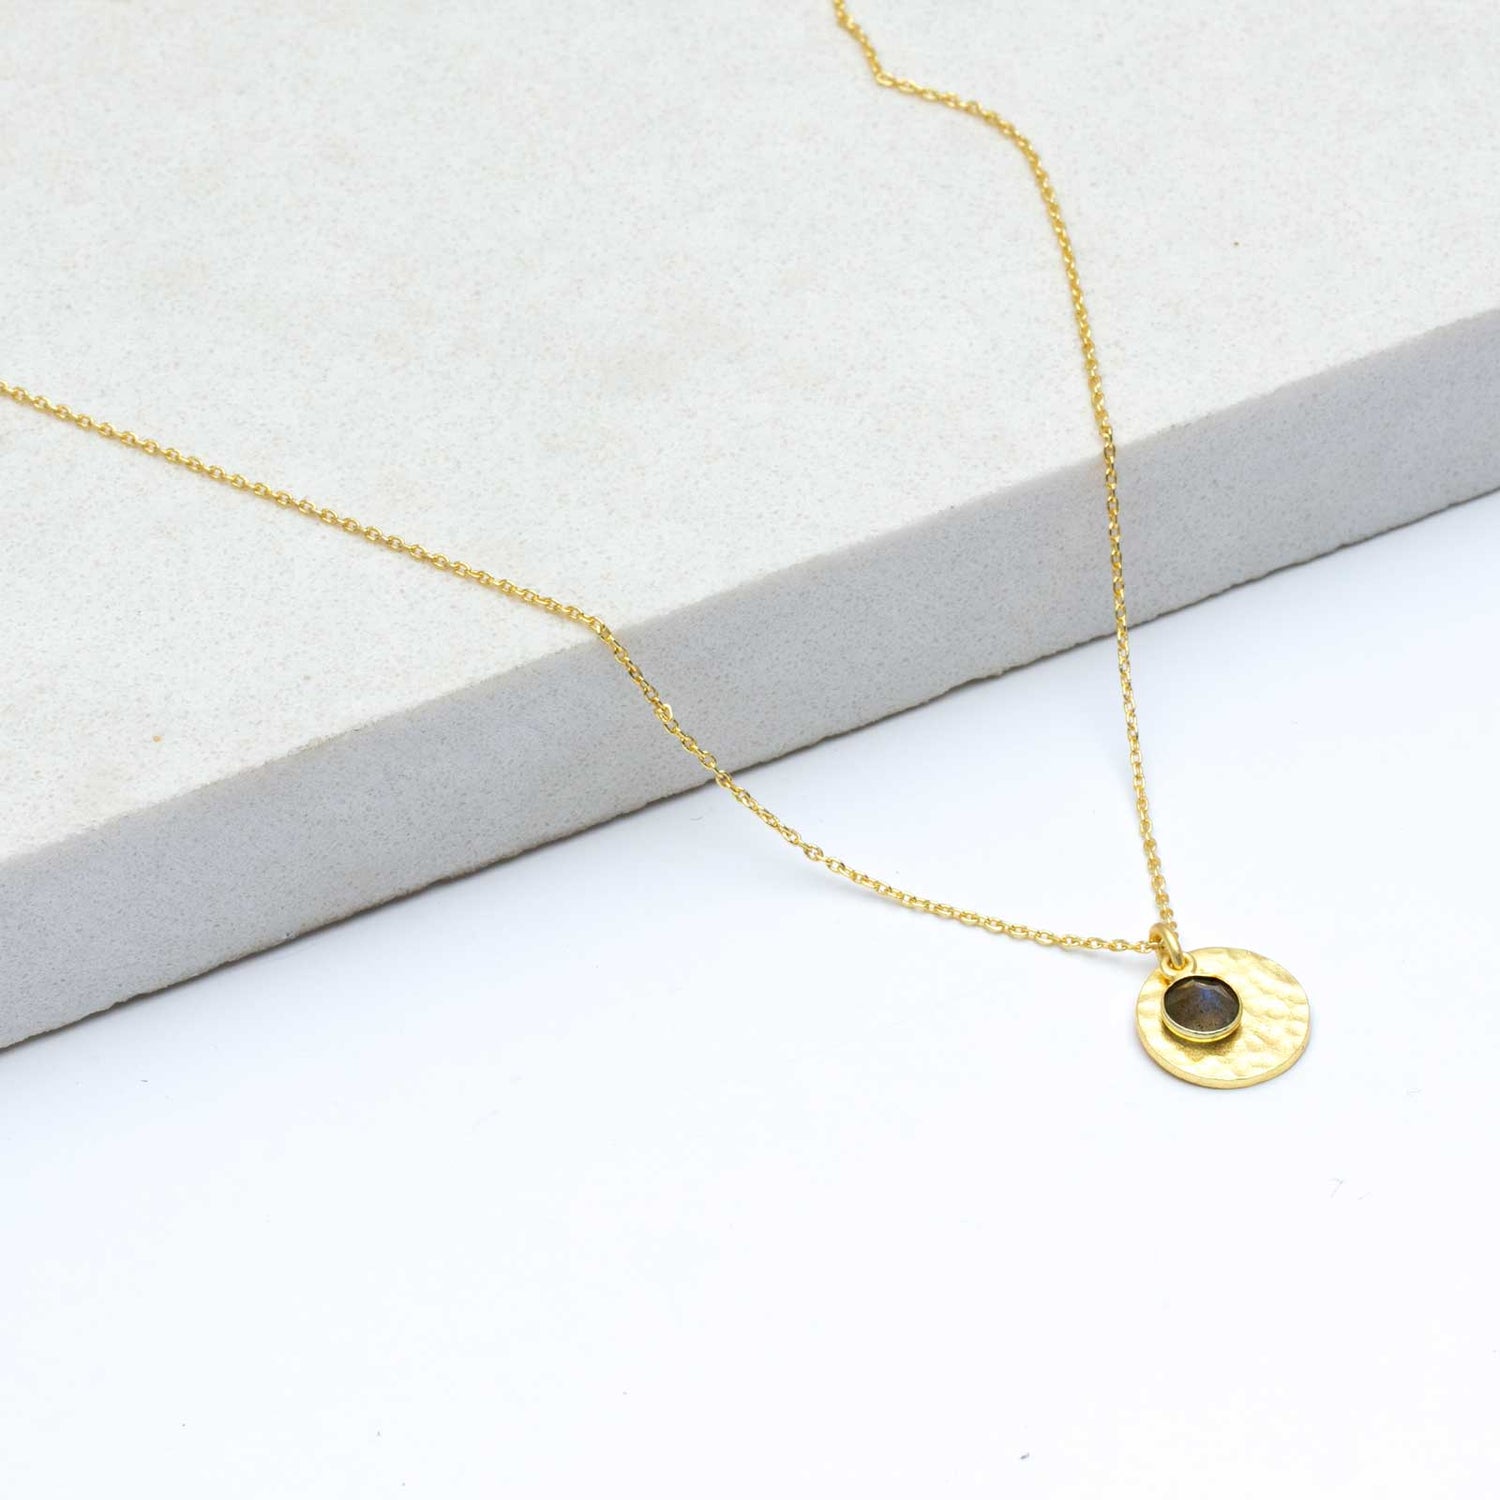 Gold Hammered Circle Medallion Pendant Necklace Necklace - rockflowerpaper